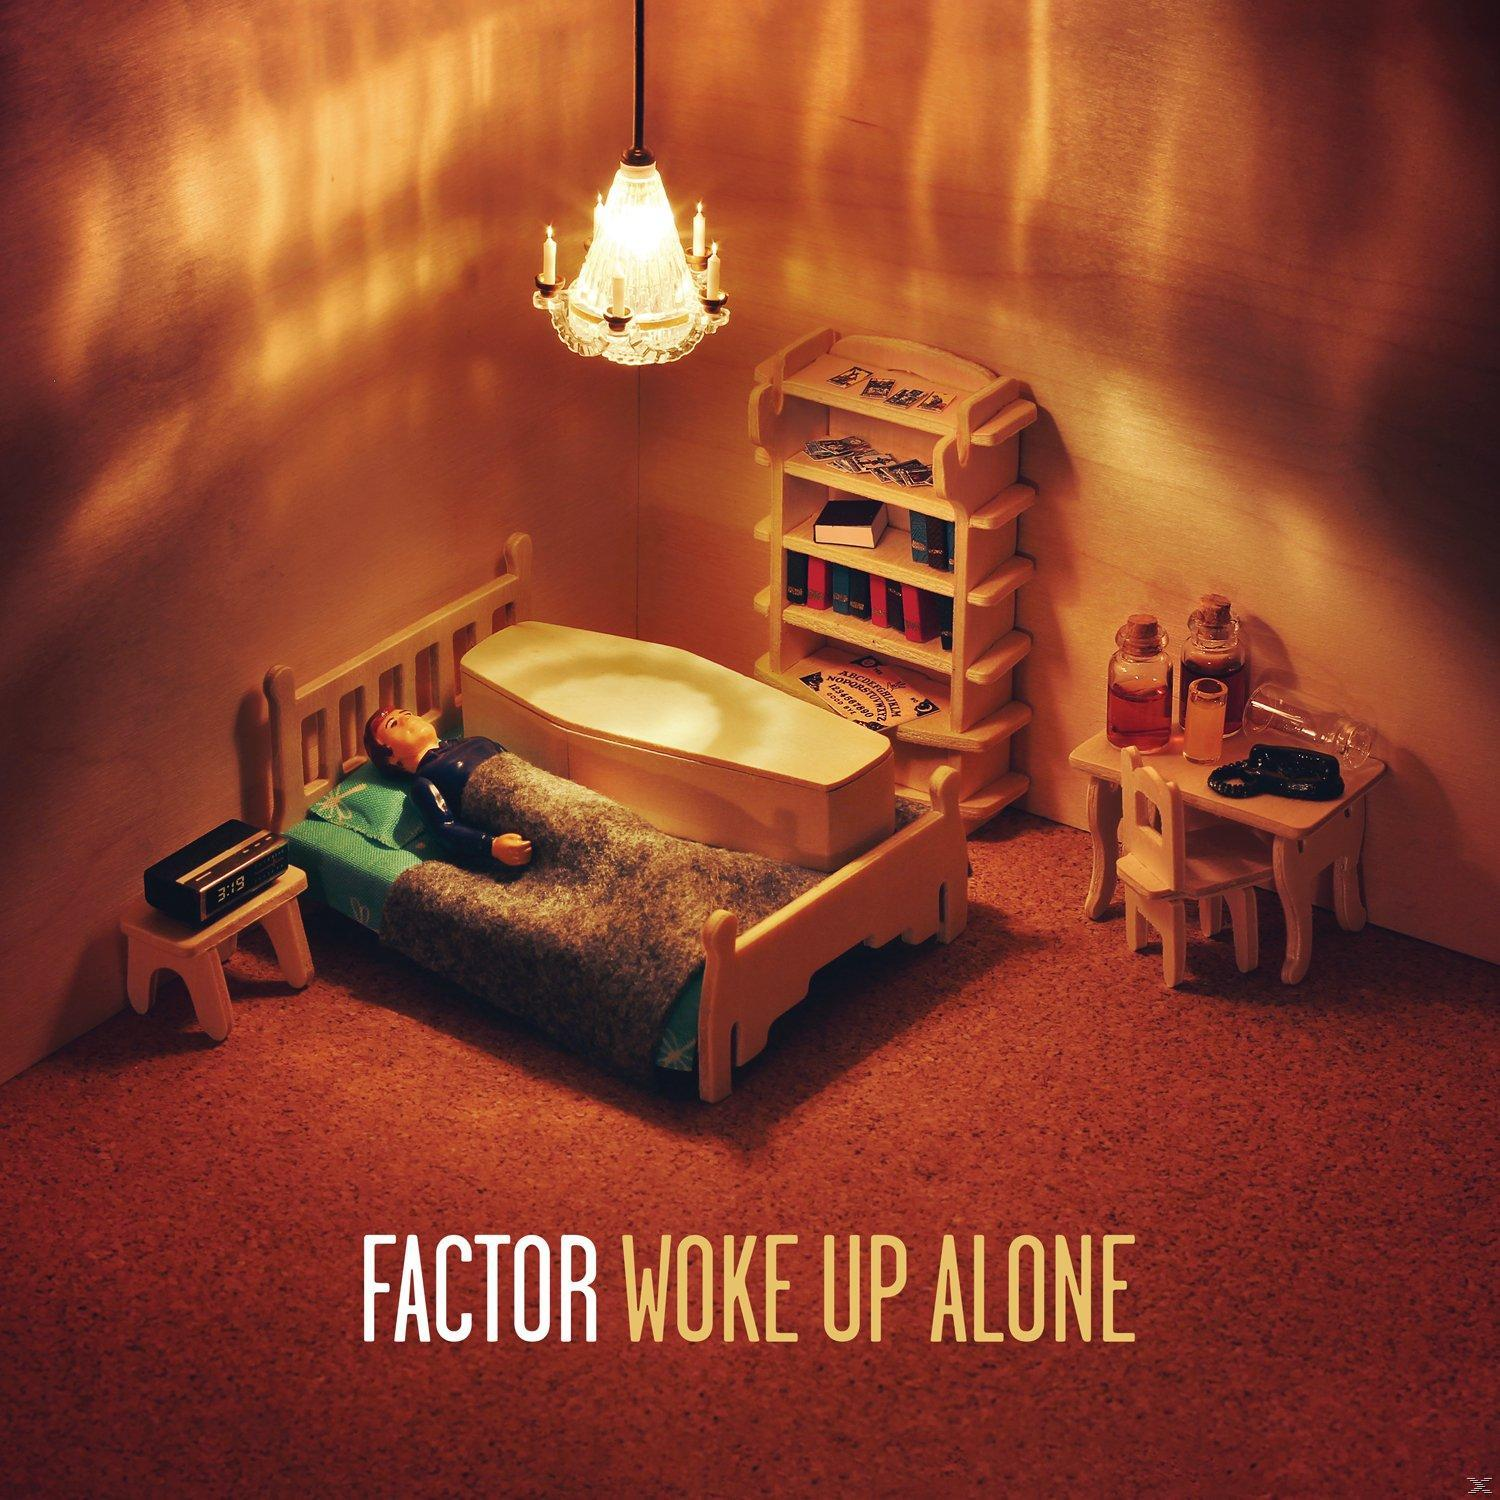 Up (CD) - Woke Factor - Alone The